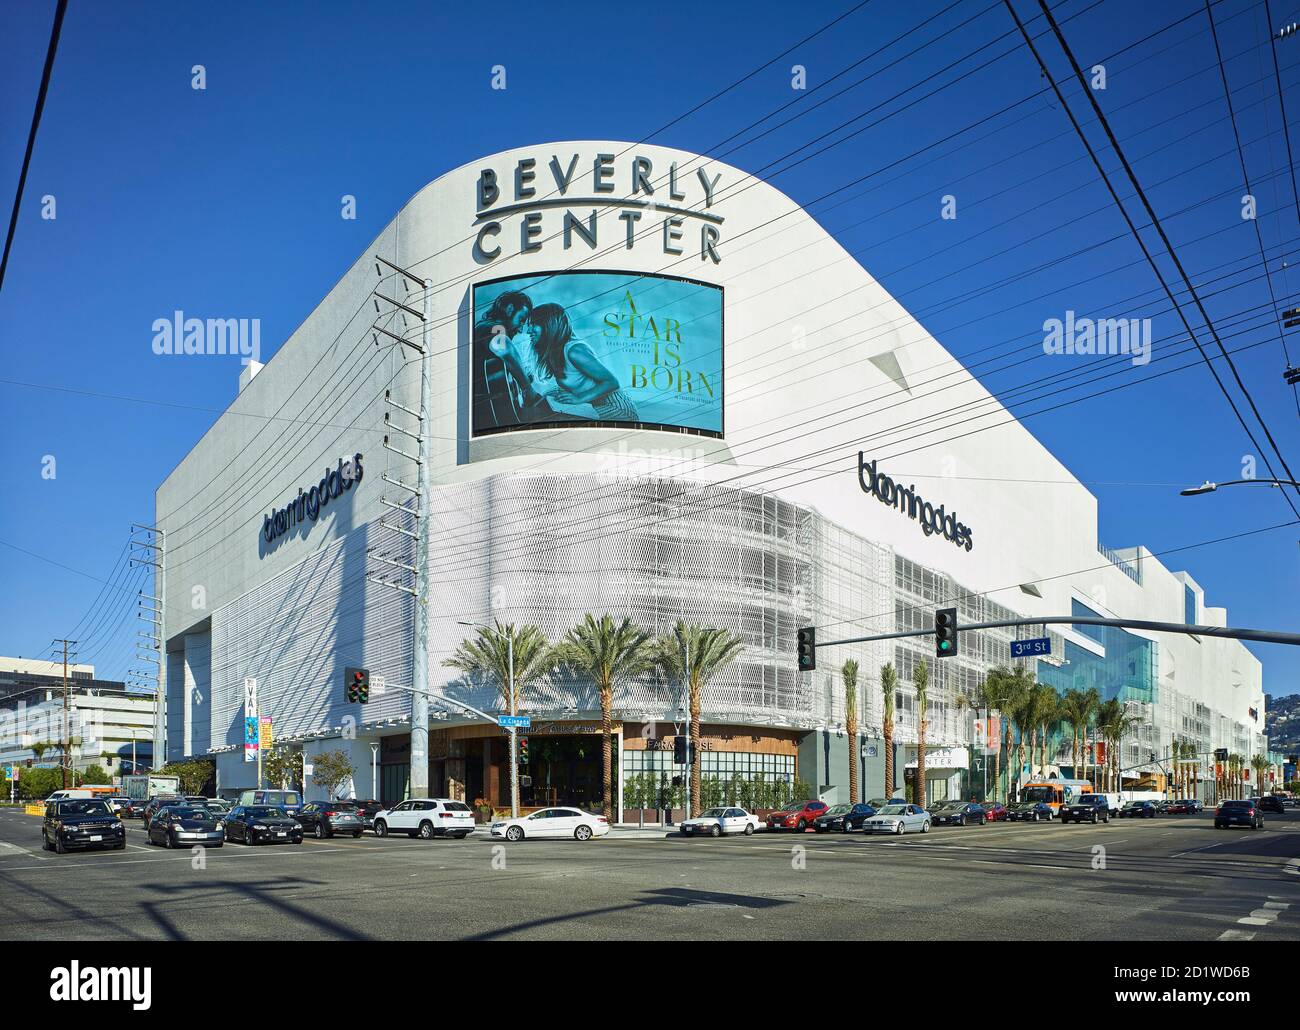 BEVERLY CENTER - 663 Photos & 872 Reviews - 8500 Beverly Blvd, Los